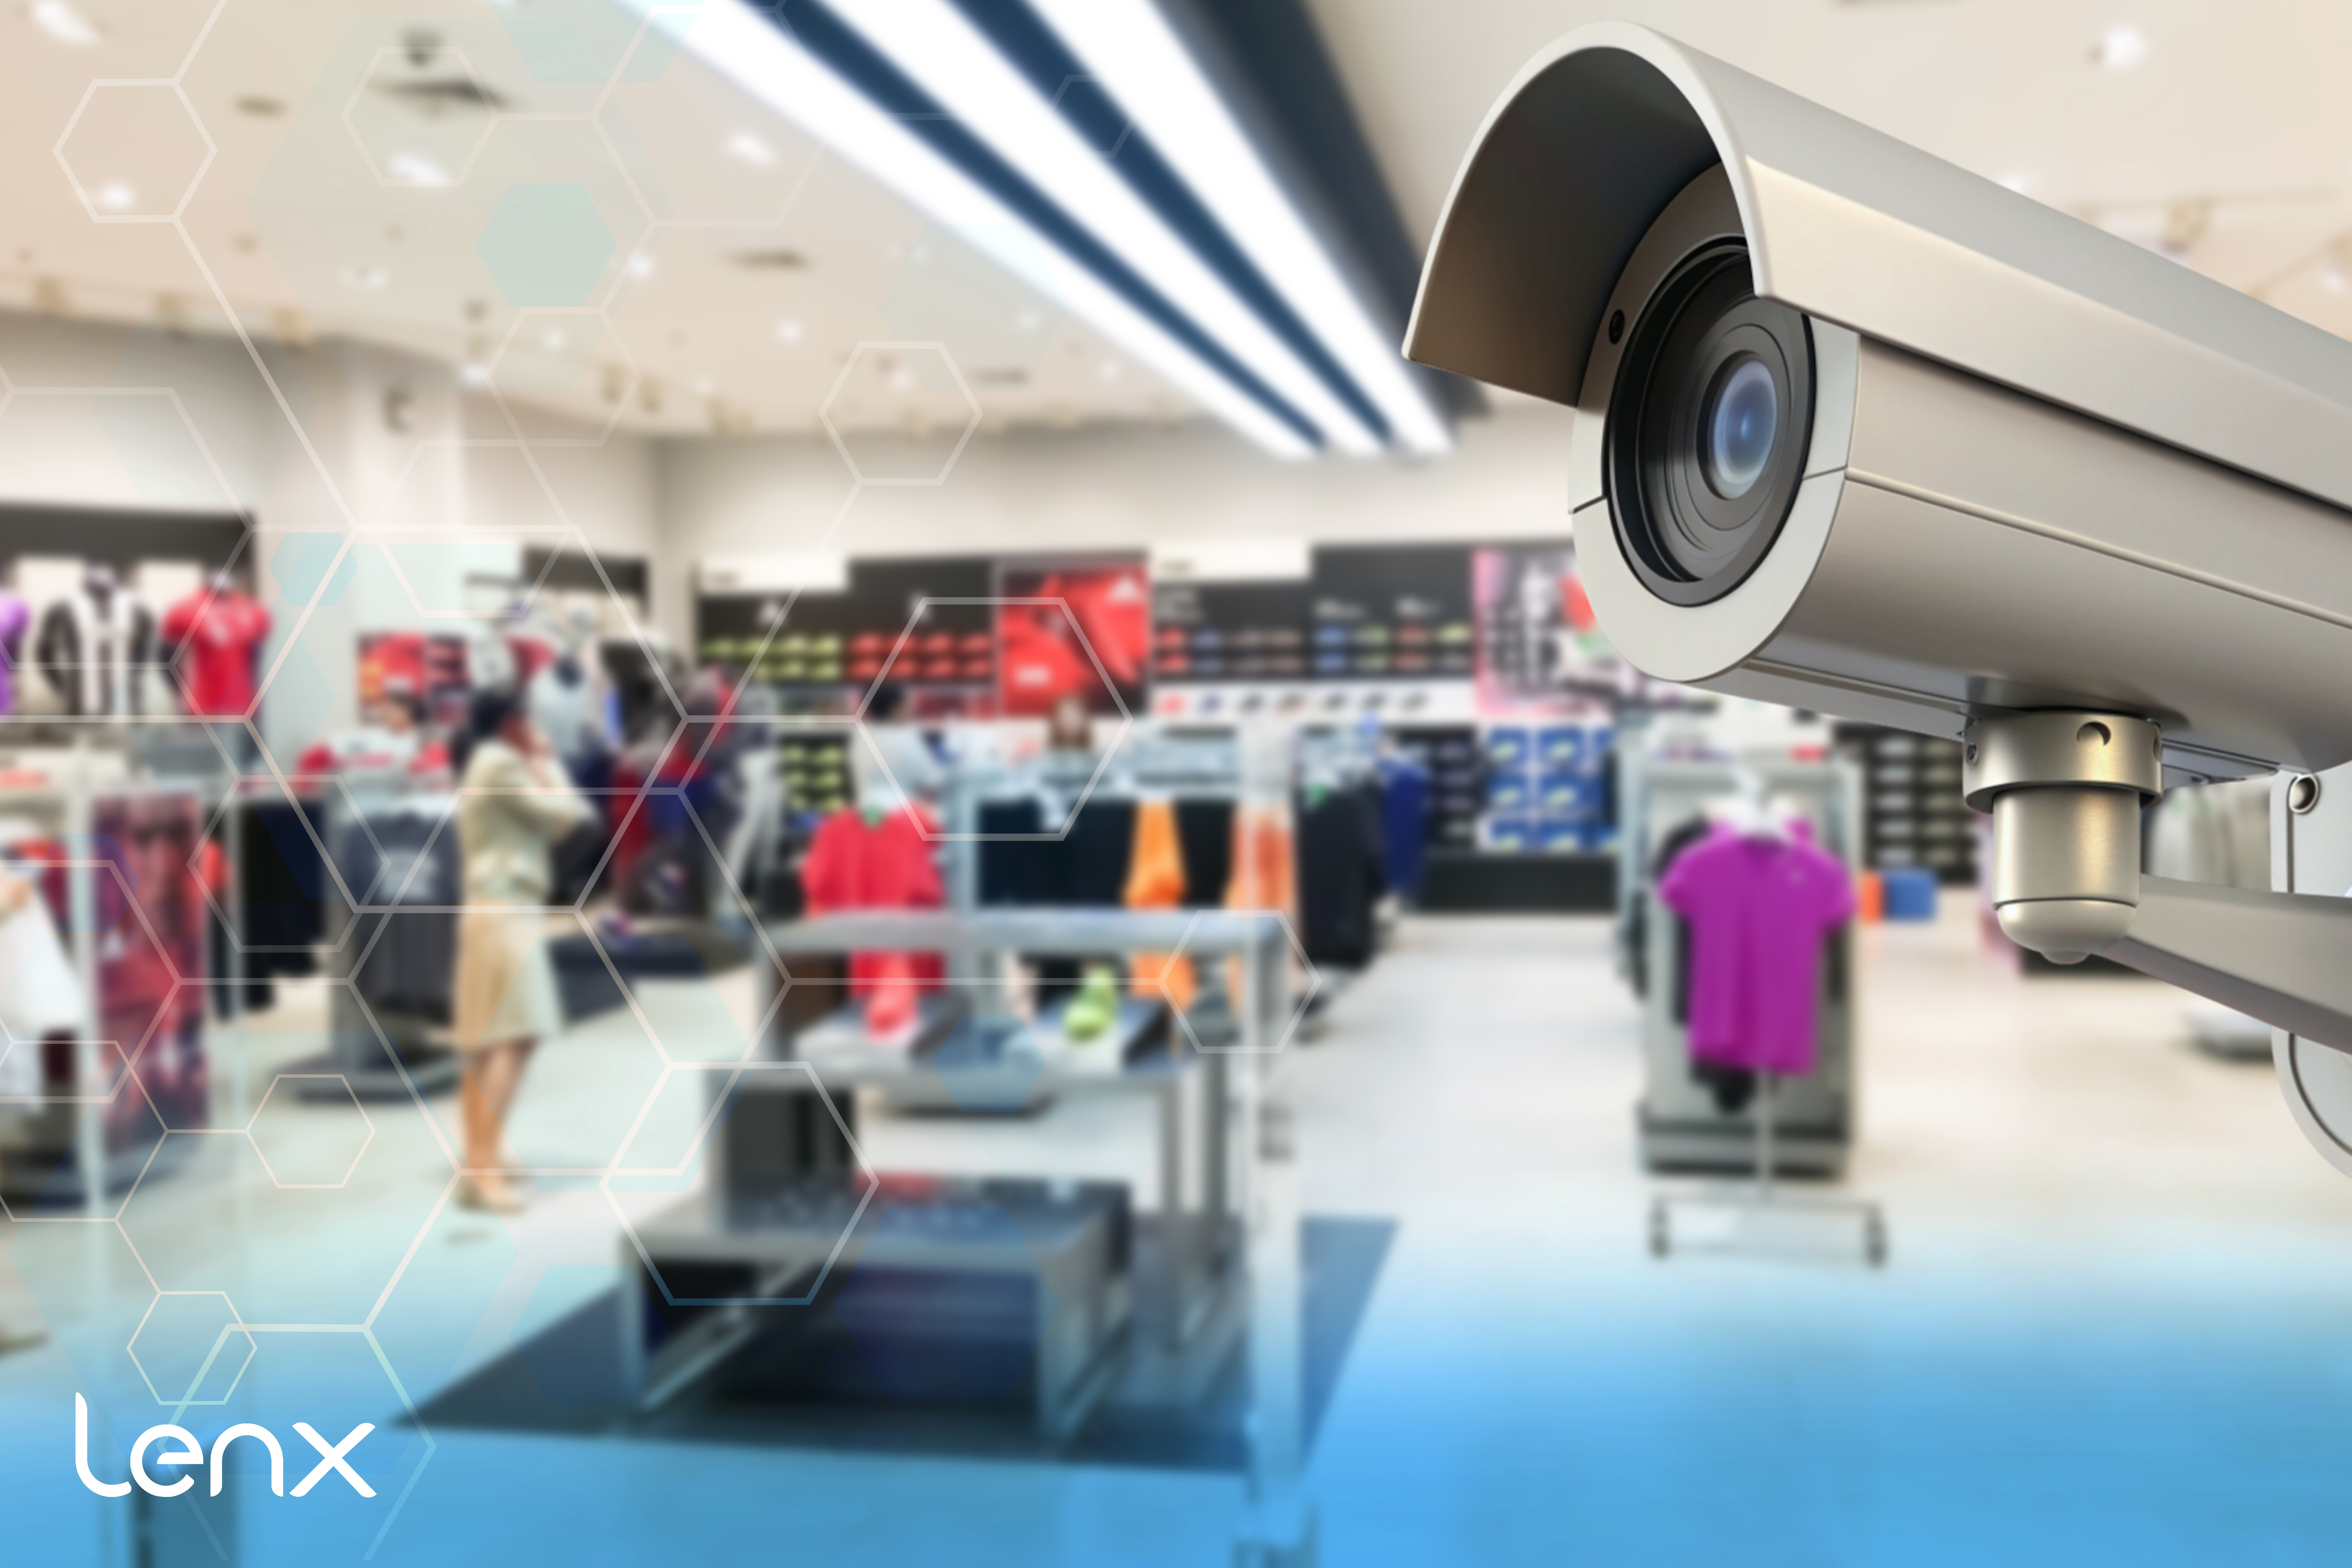 Why AI Security, Gun Detection Systems Are Perfect For Large Retail Spaces